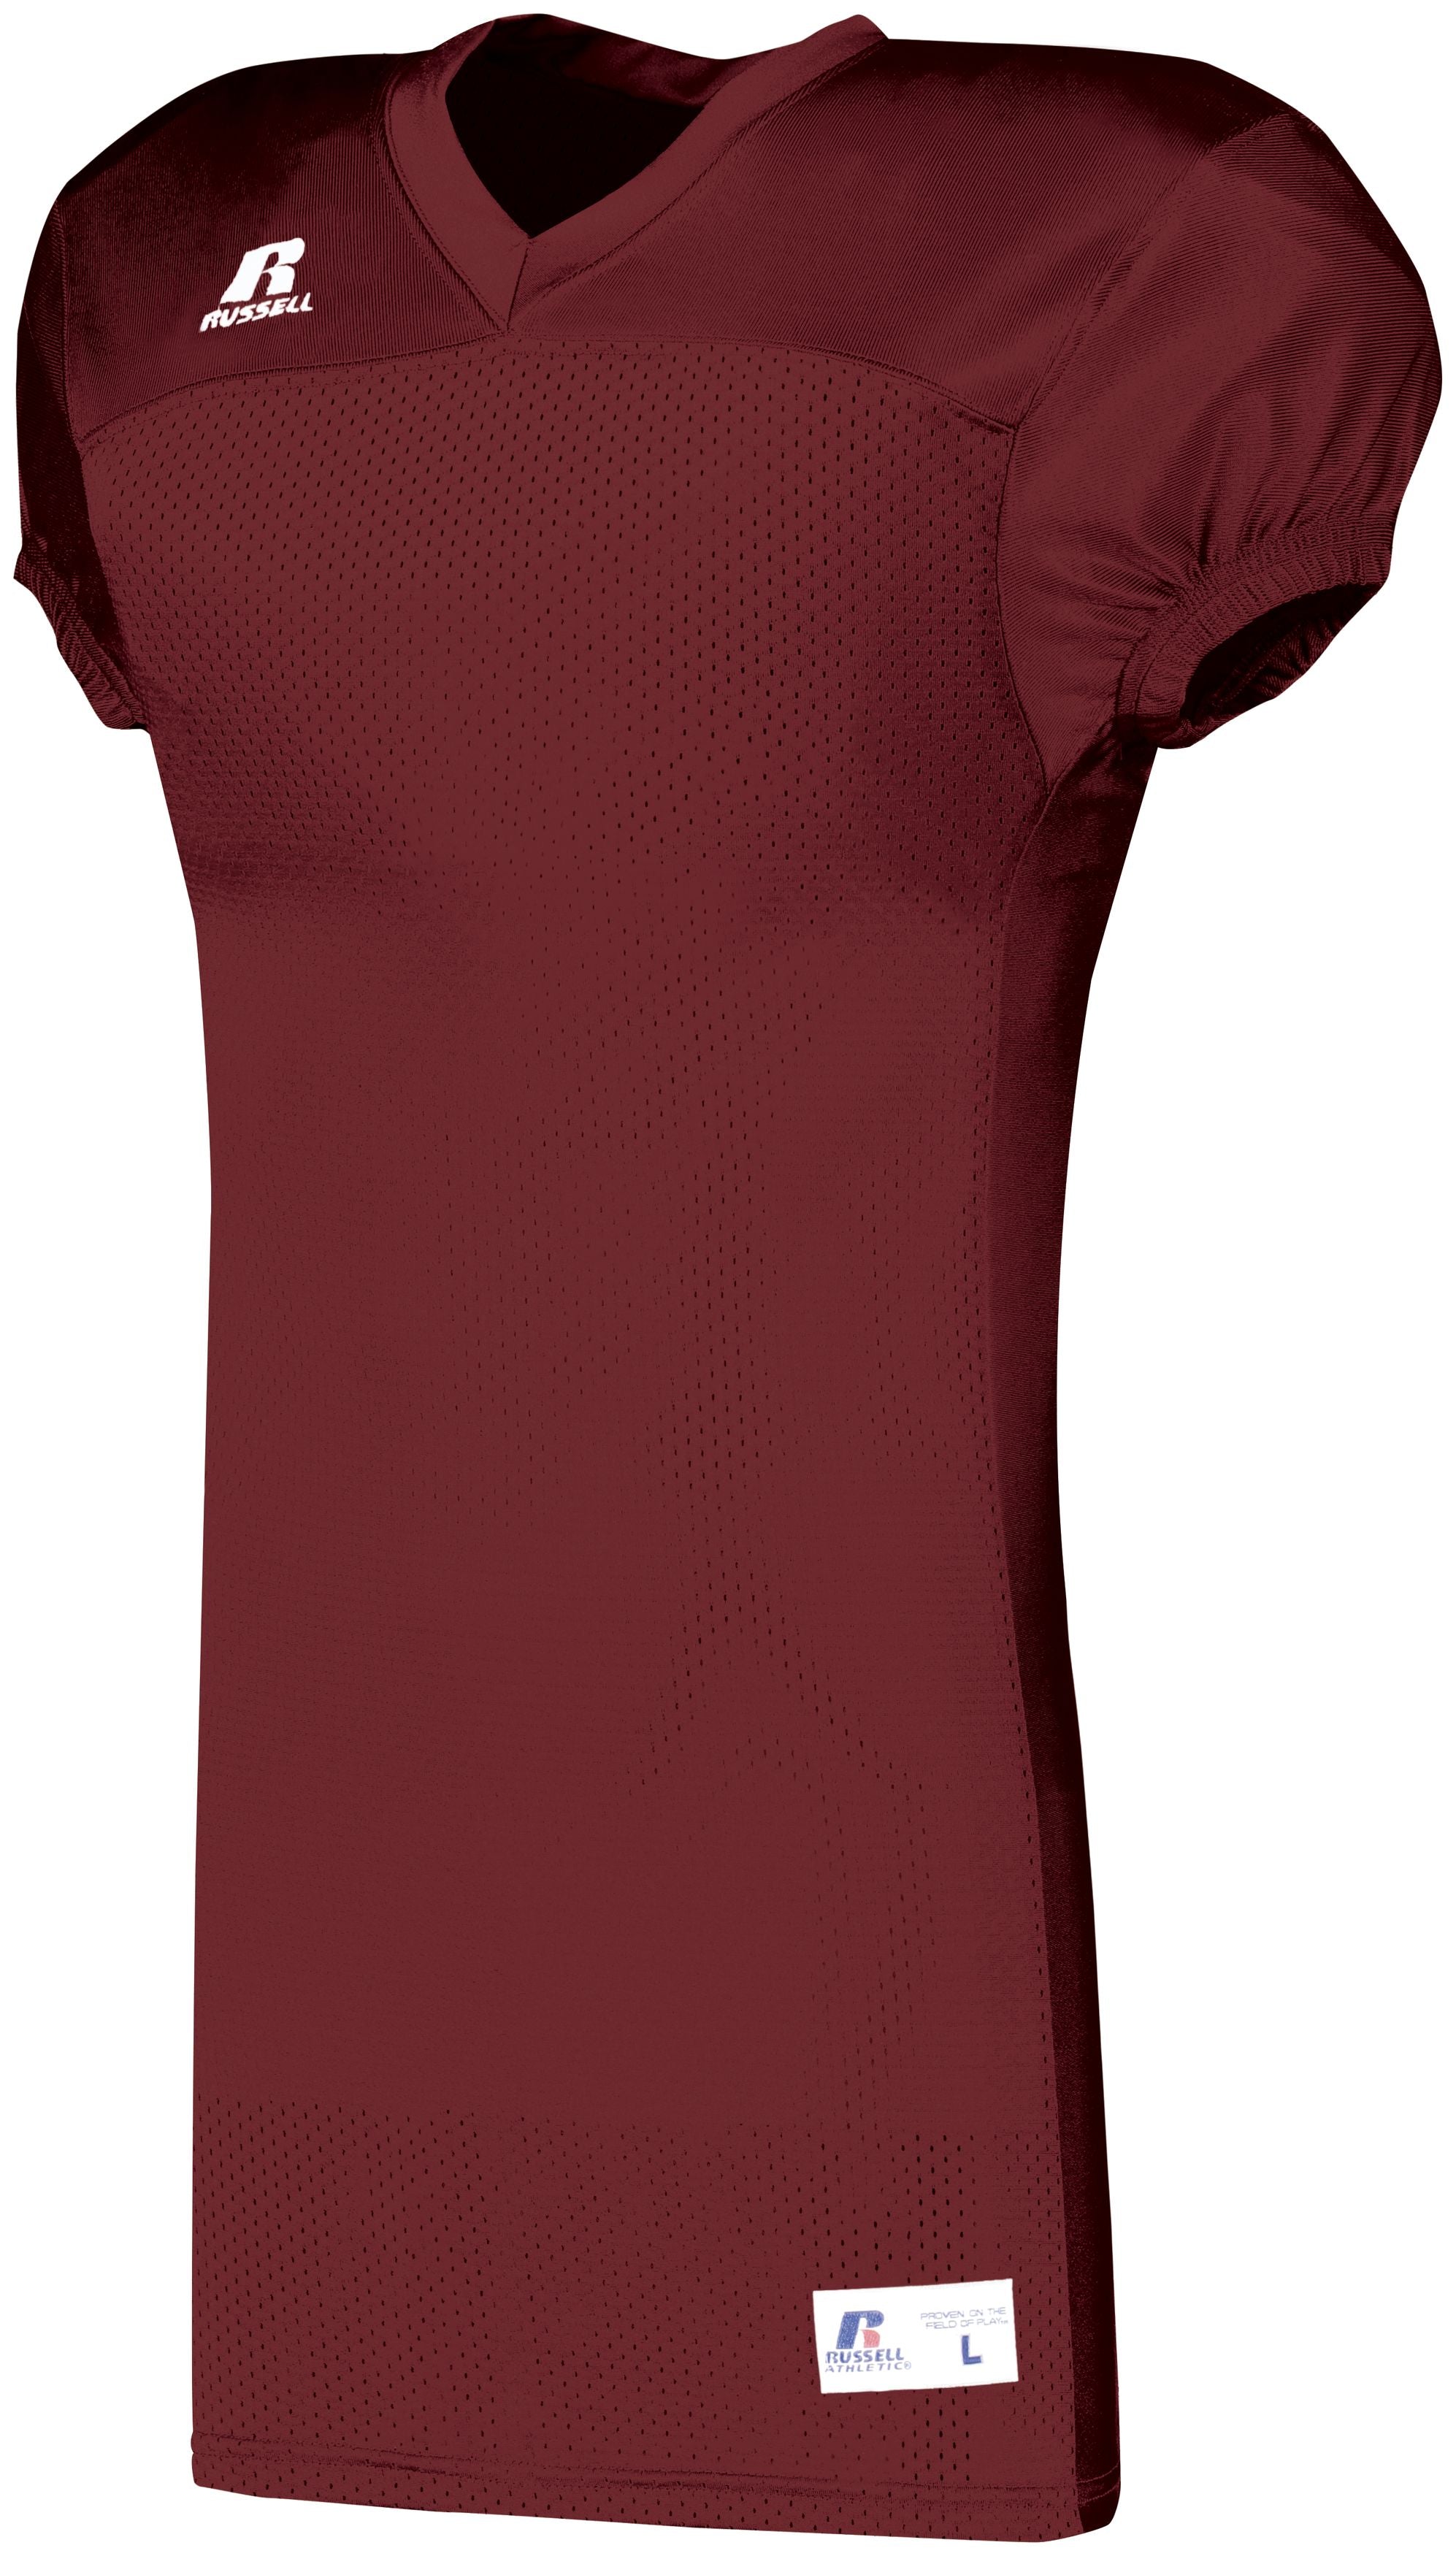 Russell Athletic Solid Jersey With Side Inserts in Cardinal  -Part of the Adult, Adult-Jersey, Football, Russell-Athletic-Products, Shirts, All-Sports, All-Sports-1 product lines at KanaleyCreations.com